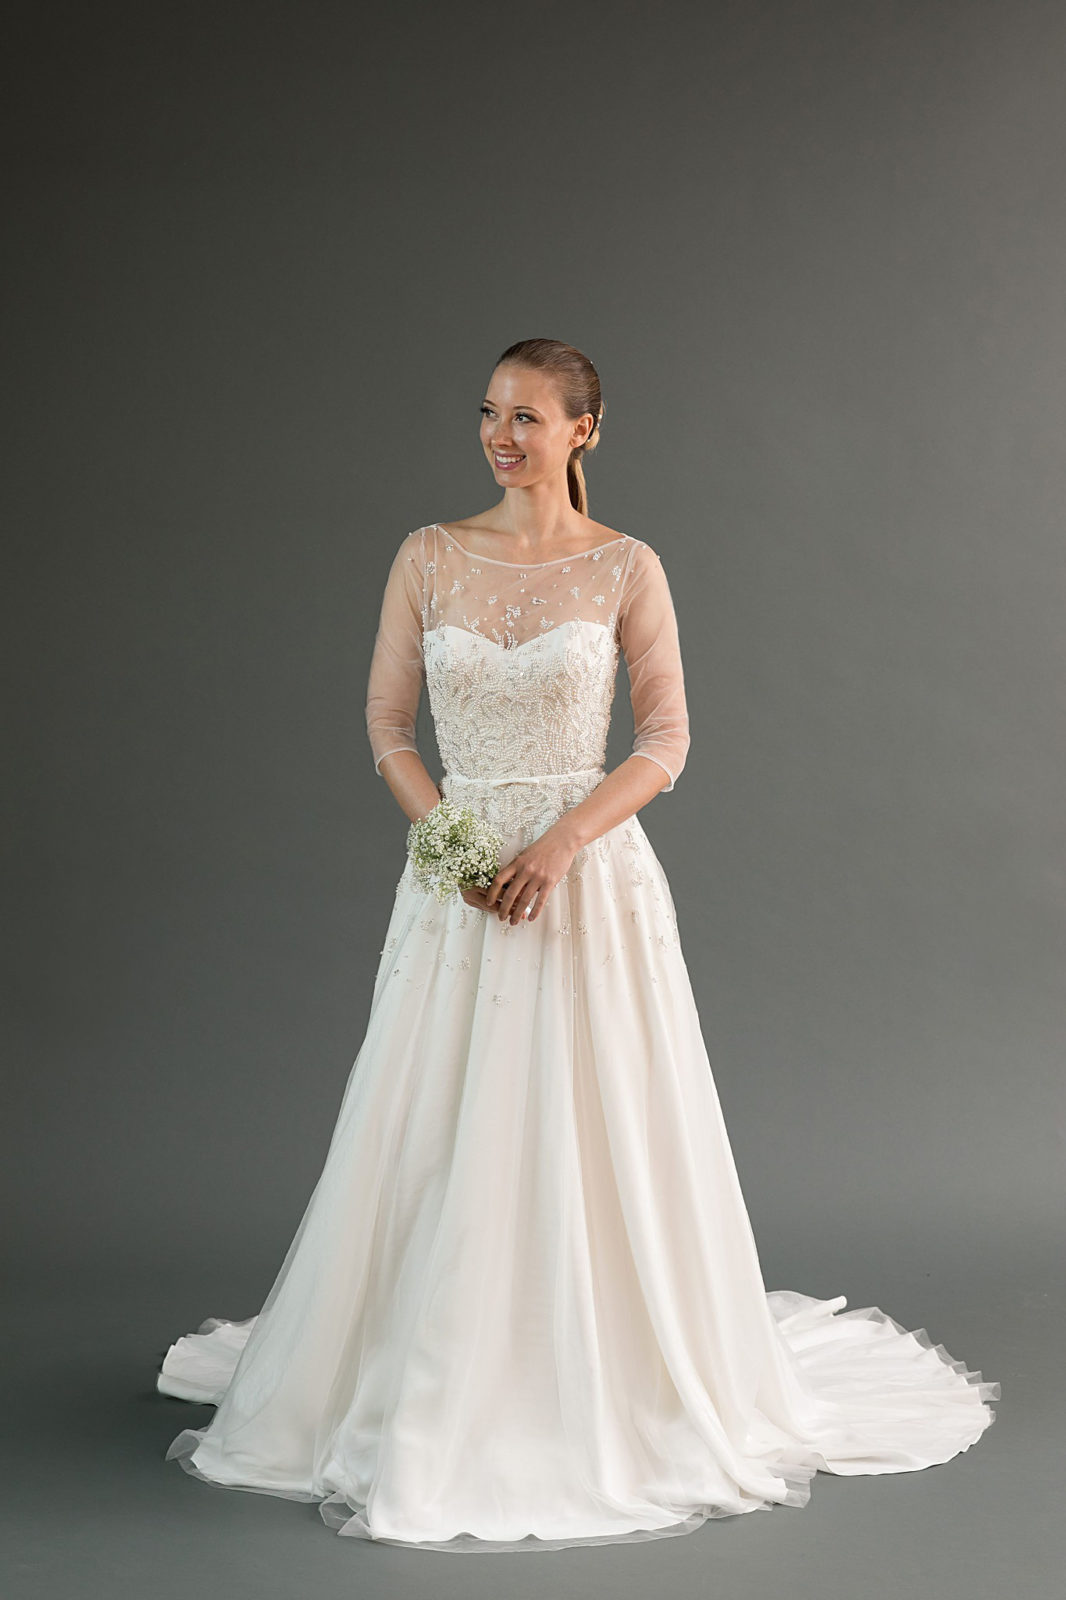 Crystal and pearl beaded a-line wedding dress with pockets by indie bridal designer Edith Elan